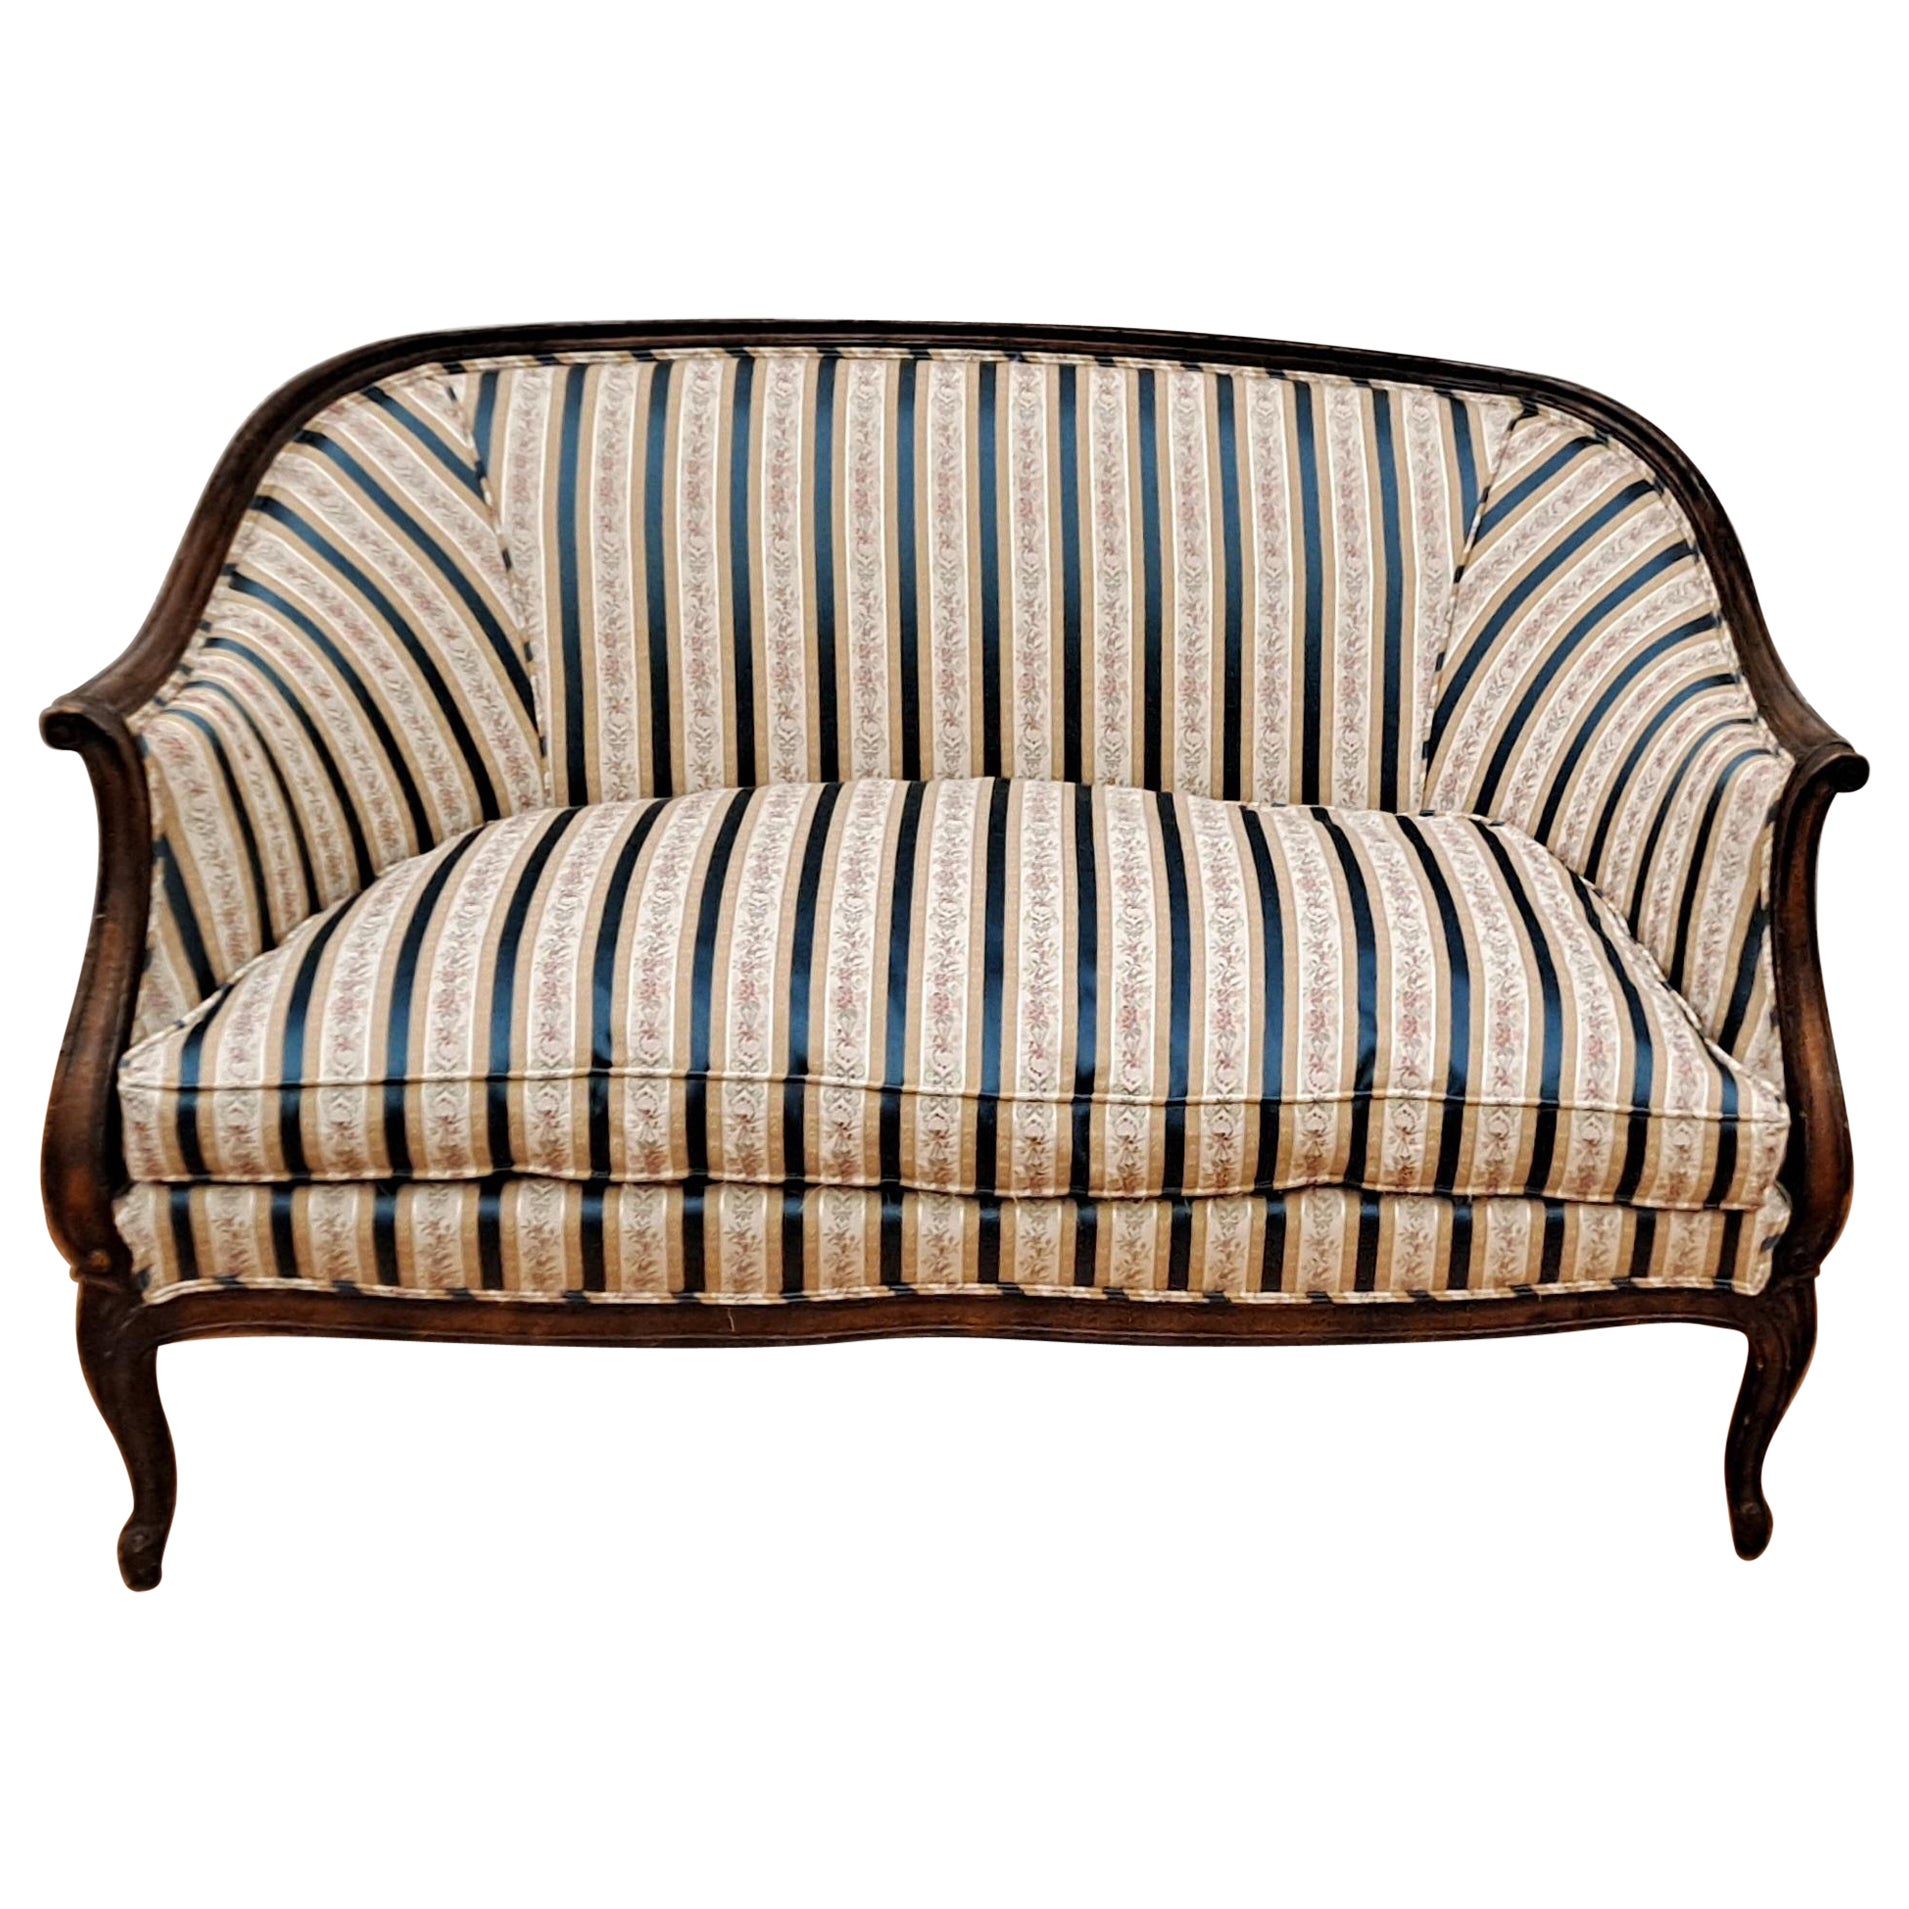 Early 20th Century French Provincial Style Sofa   For Sale